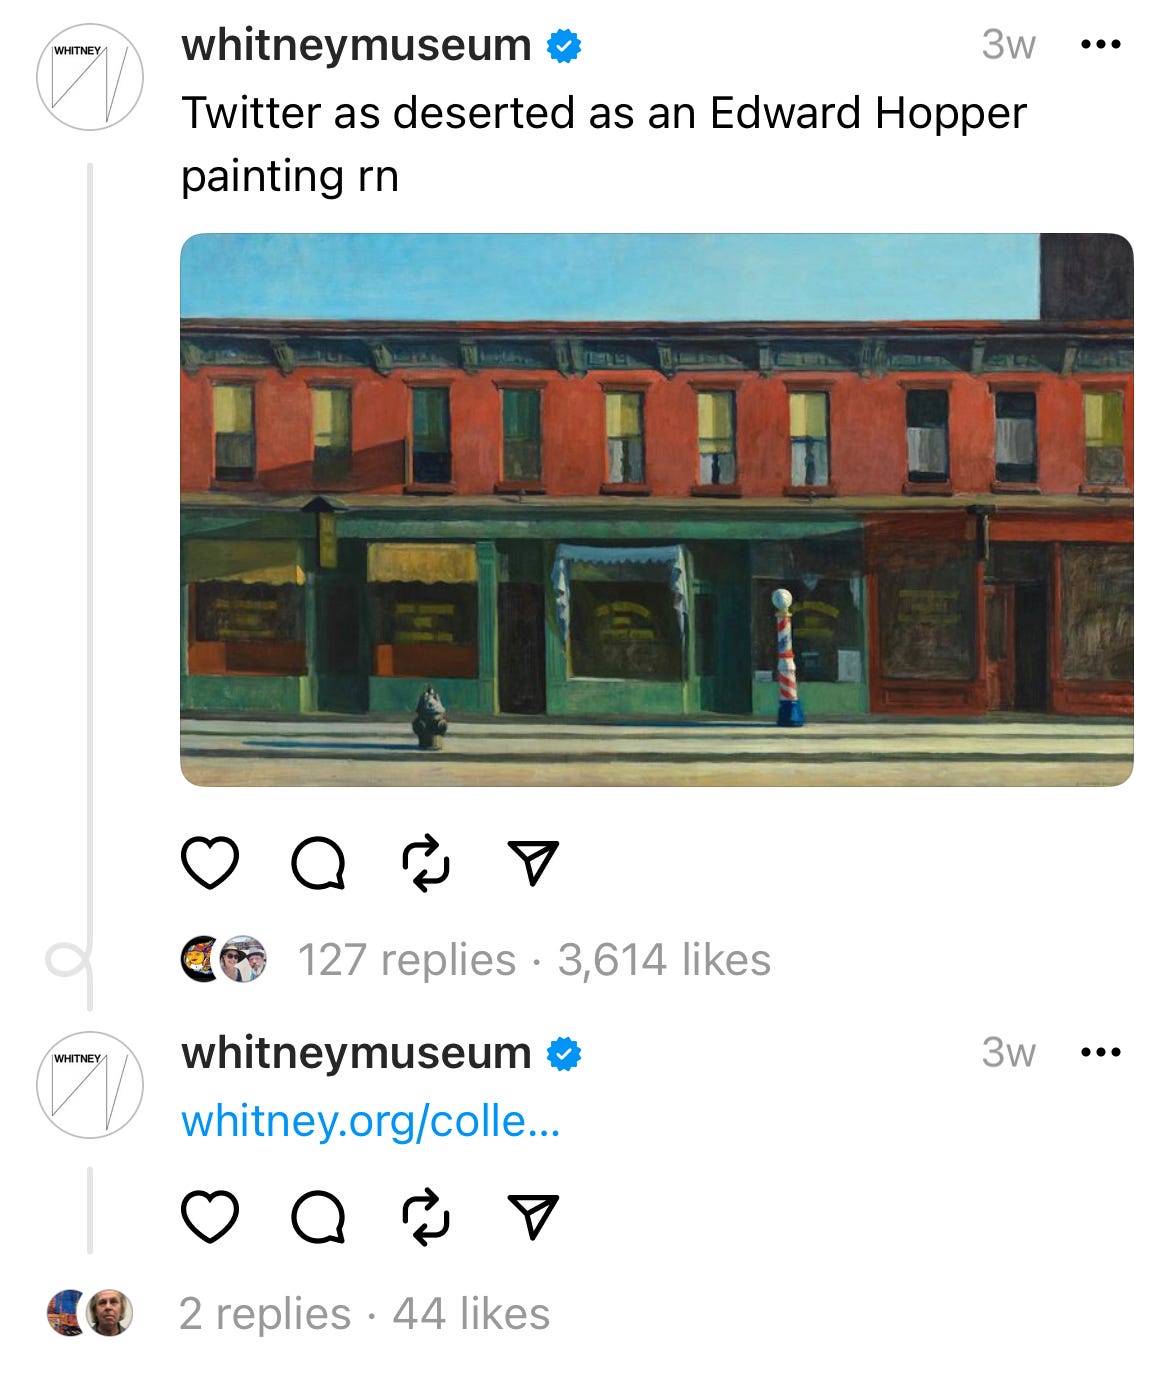 Post that says "Twitter as deserted as an Edward Hopper painting rn" with a desolate Edward Hopper painting below